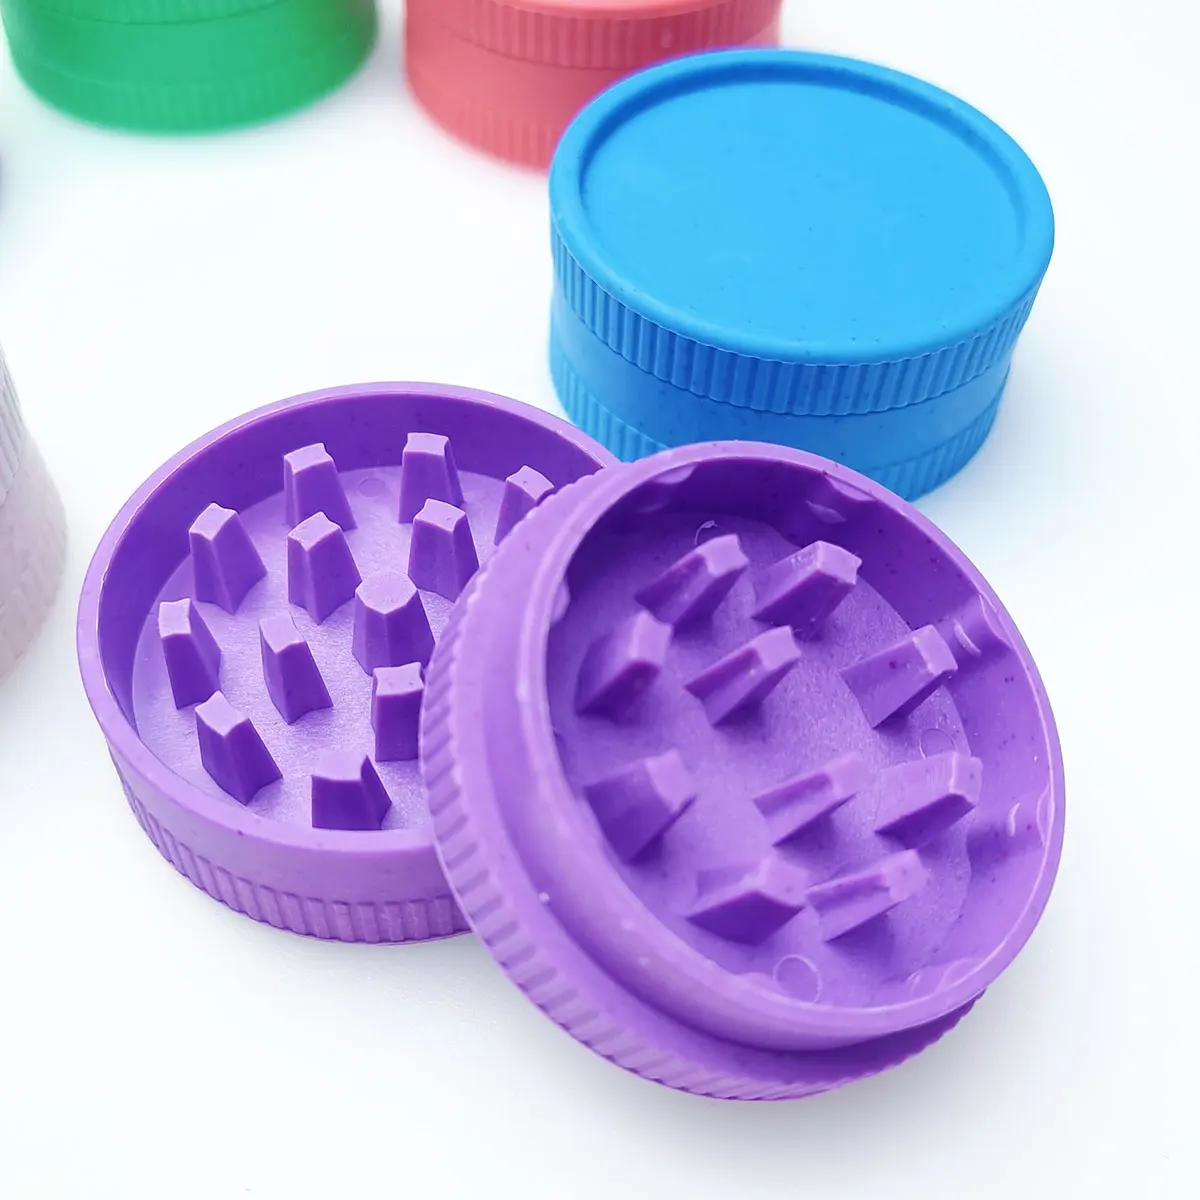 Manufacturers Two Layer Colourful Manual Herb Grinder Biodegradable 55MM Plastic Grinders Smoking